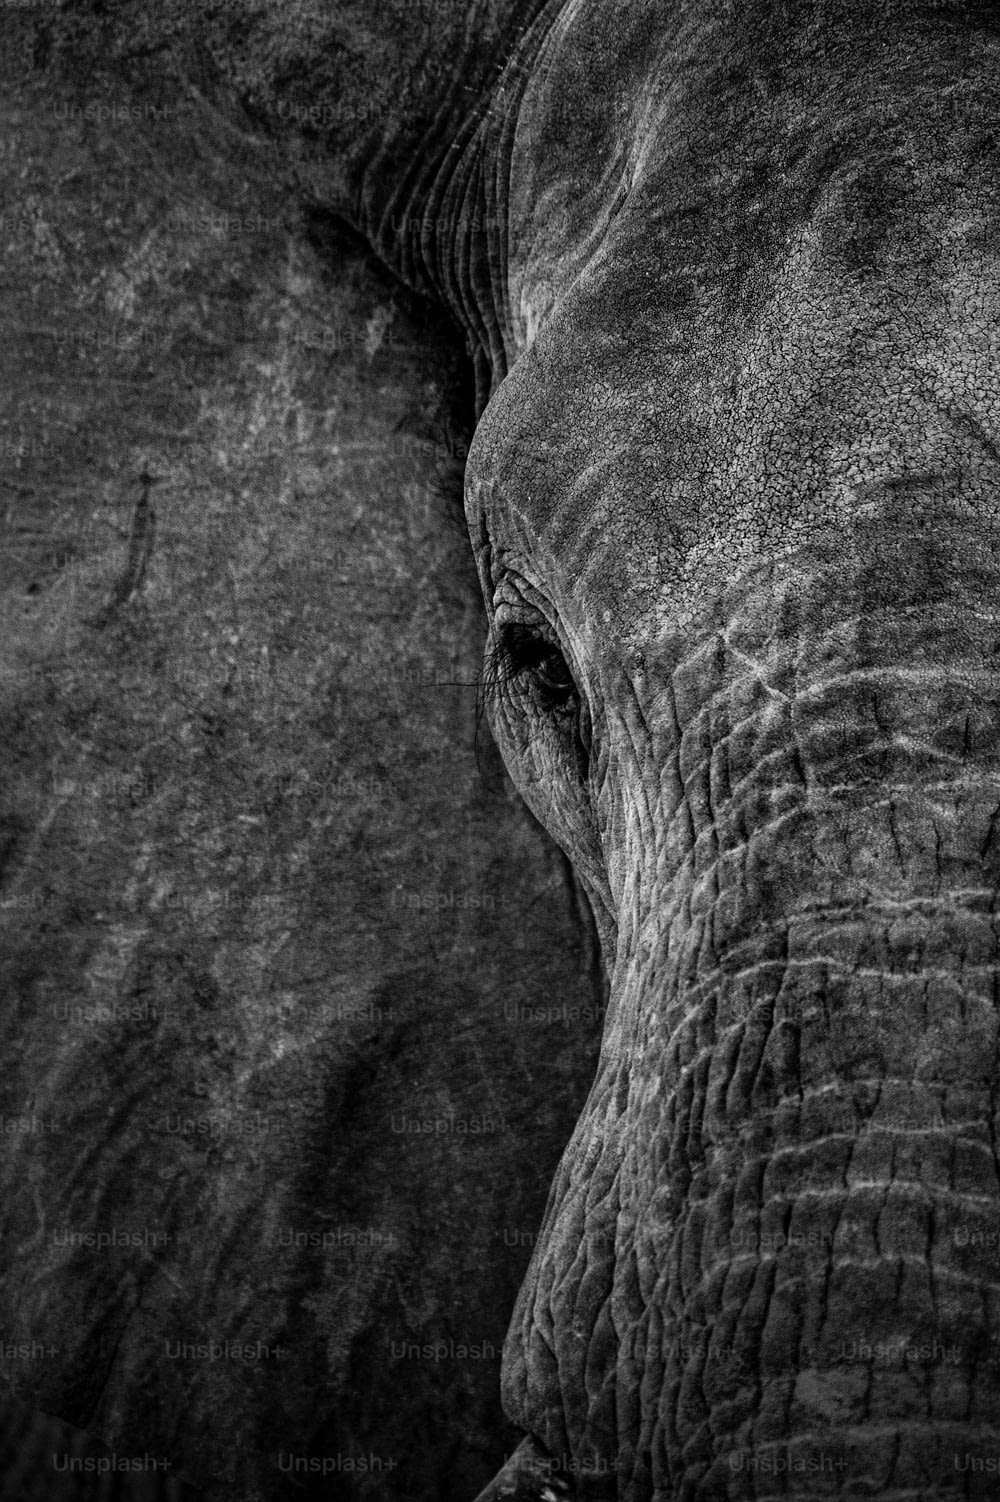 a black and white photo of an elephant's face